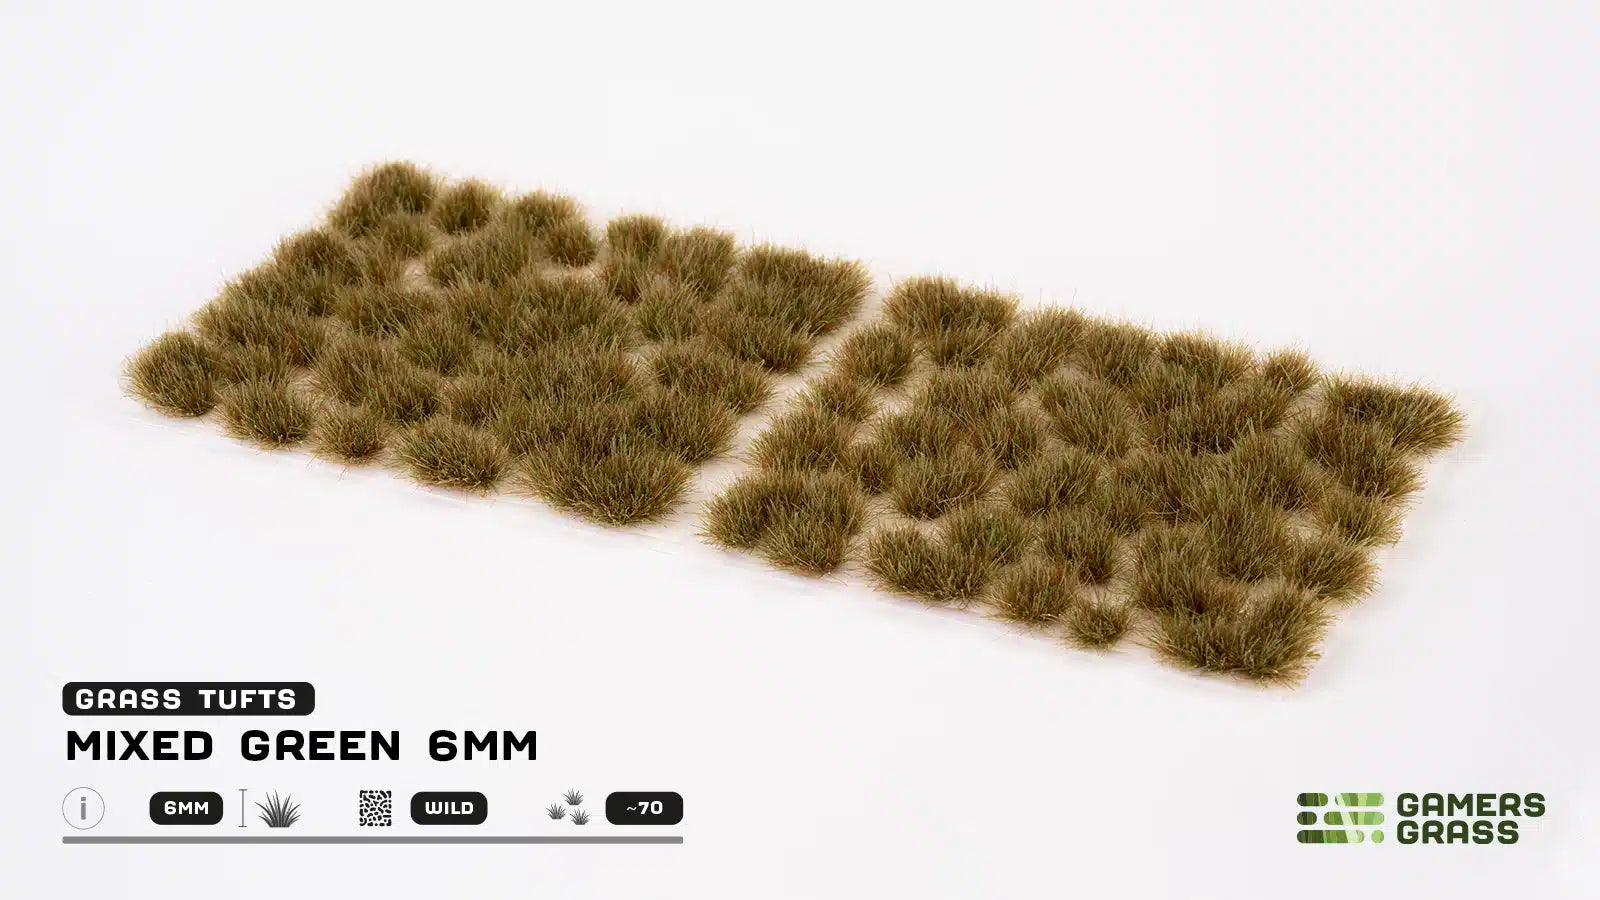 Mixed Green 6mm Tufts (Wild) - Gamers Grass - 0